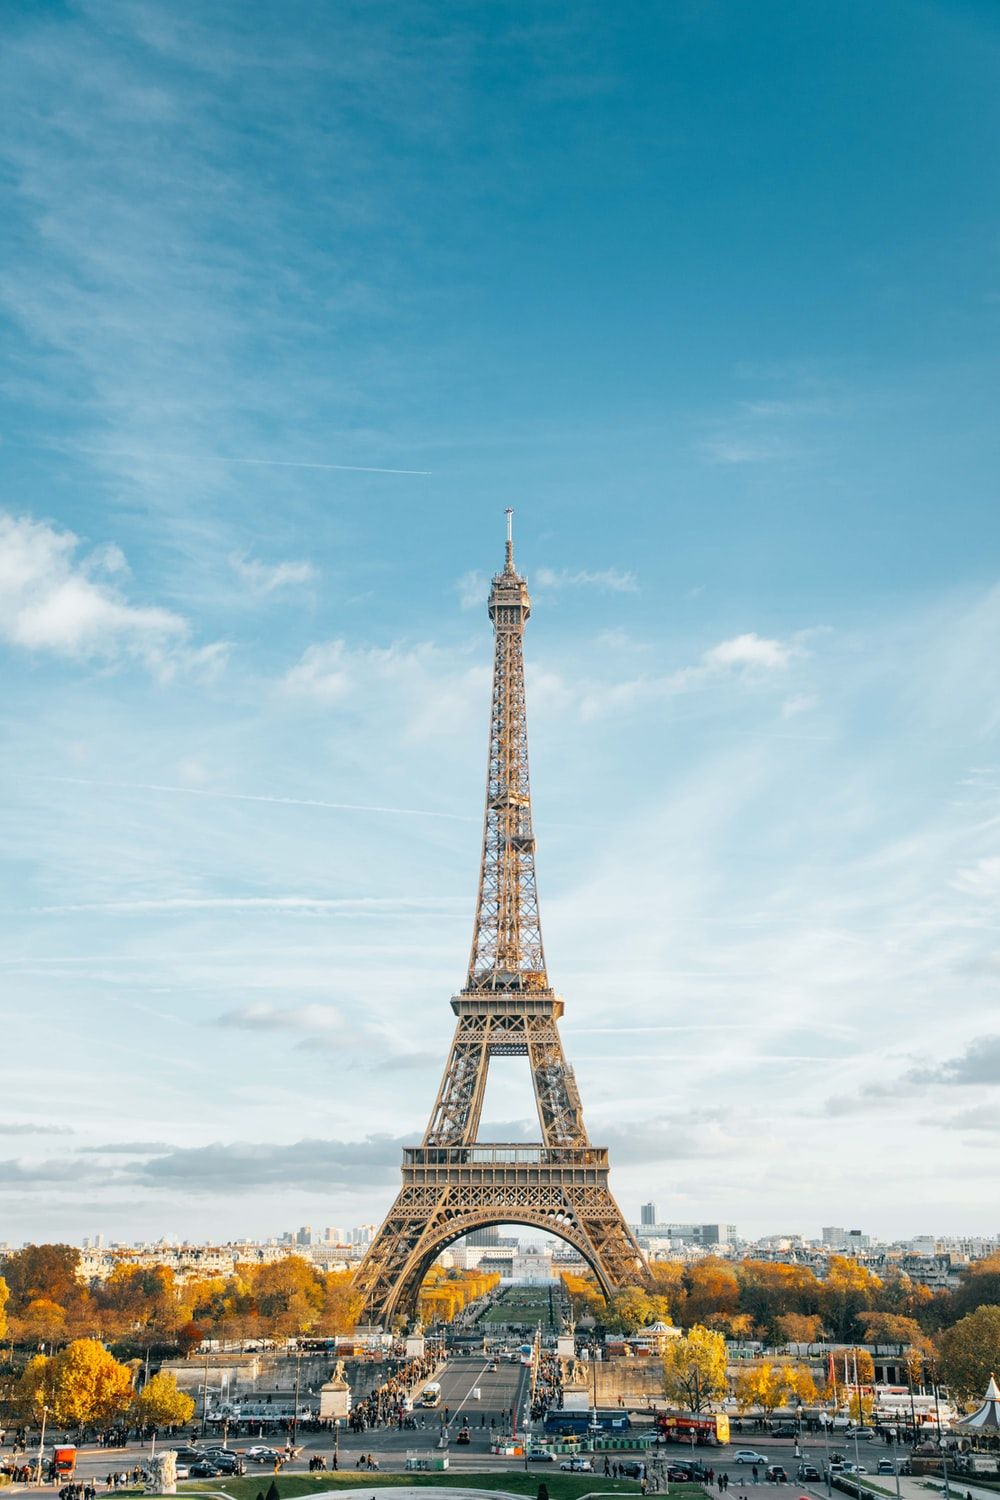 Eiffel Tower Image [HD]. Download Free Image